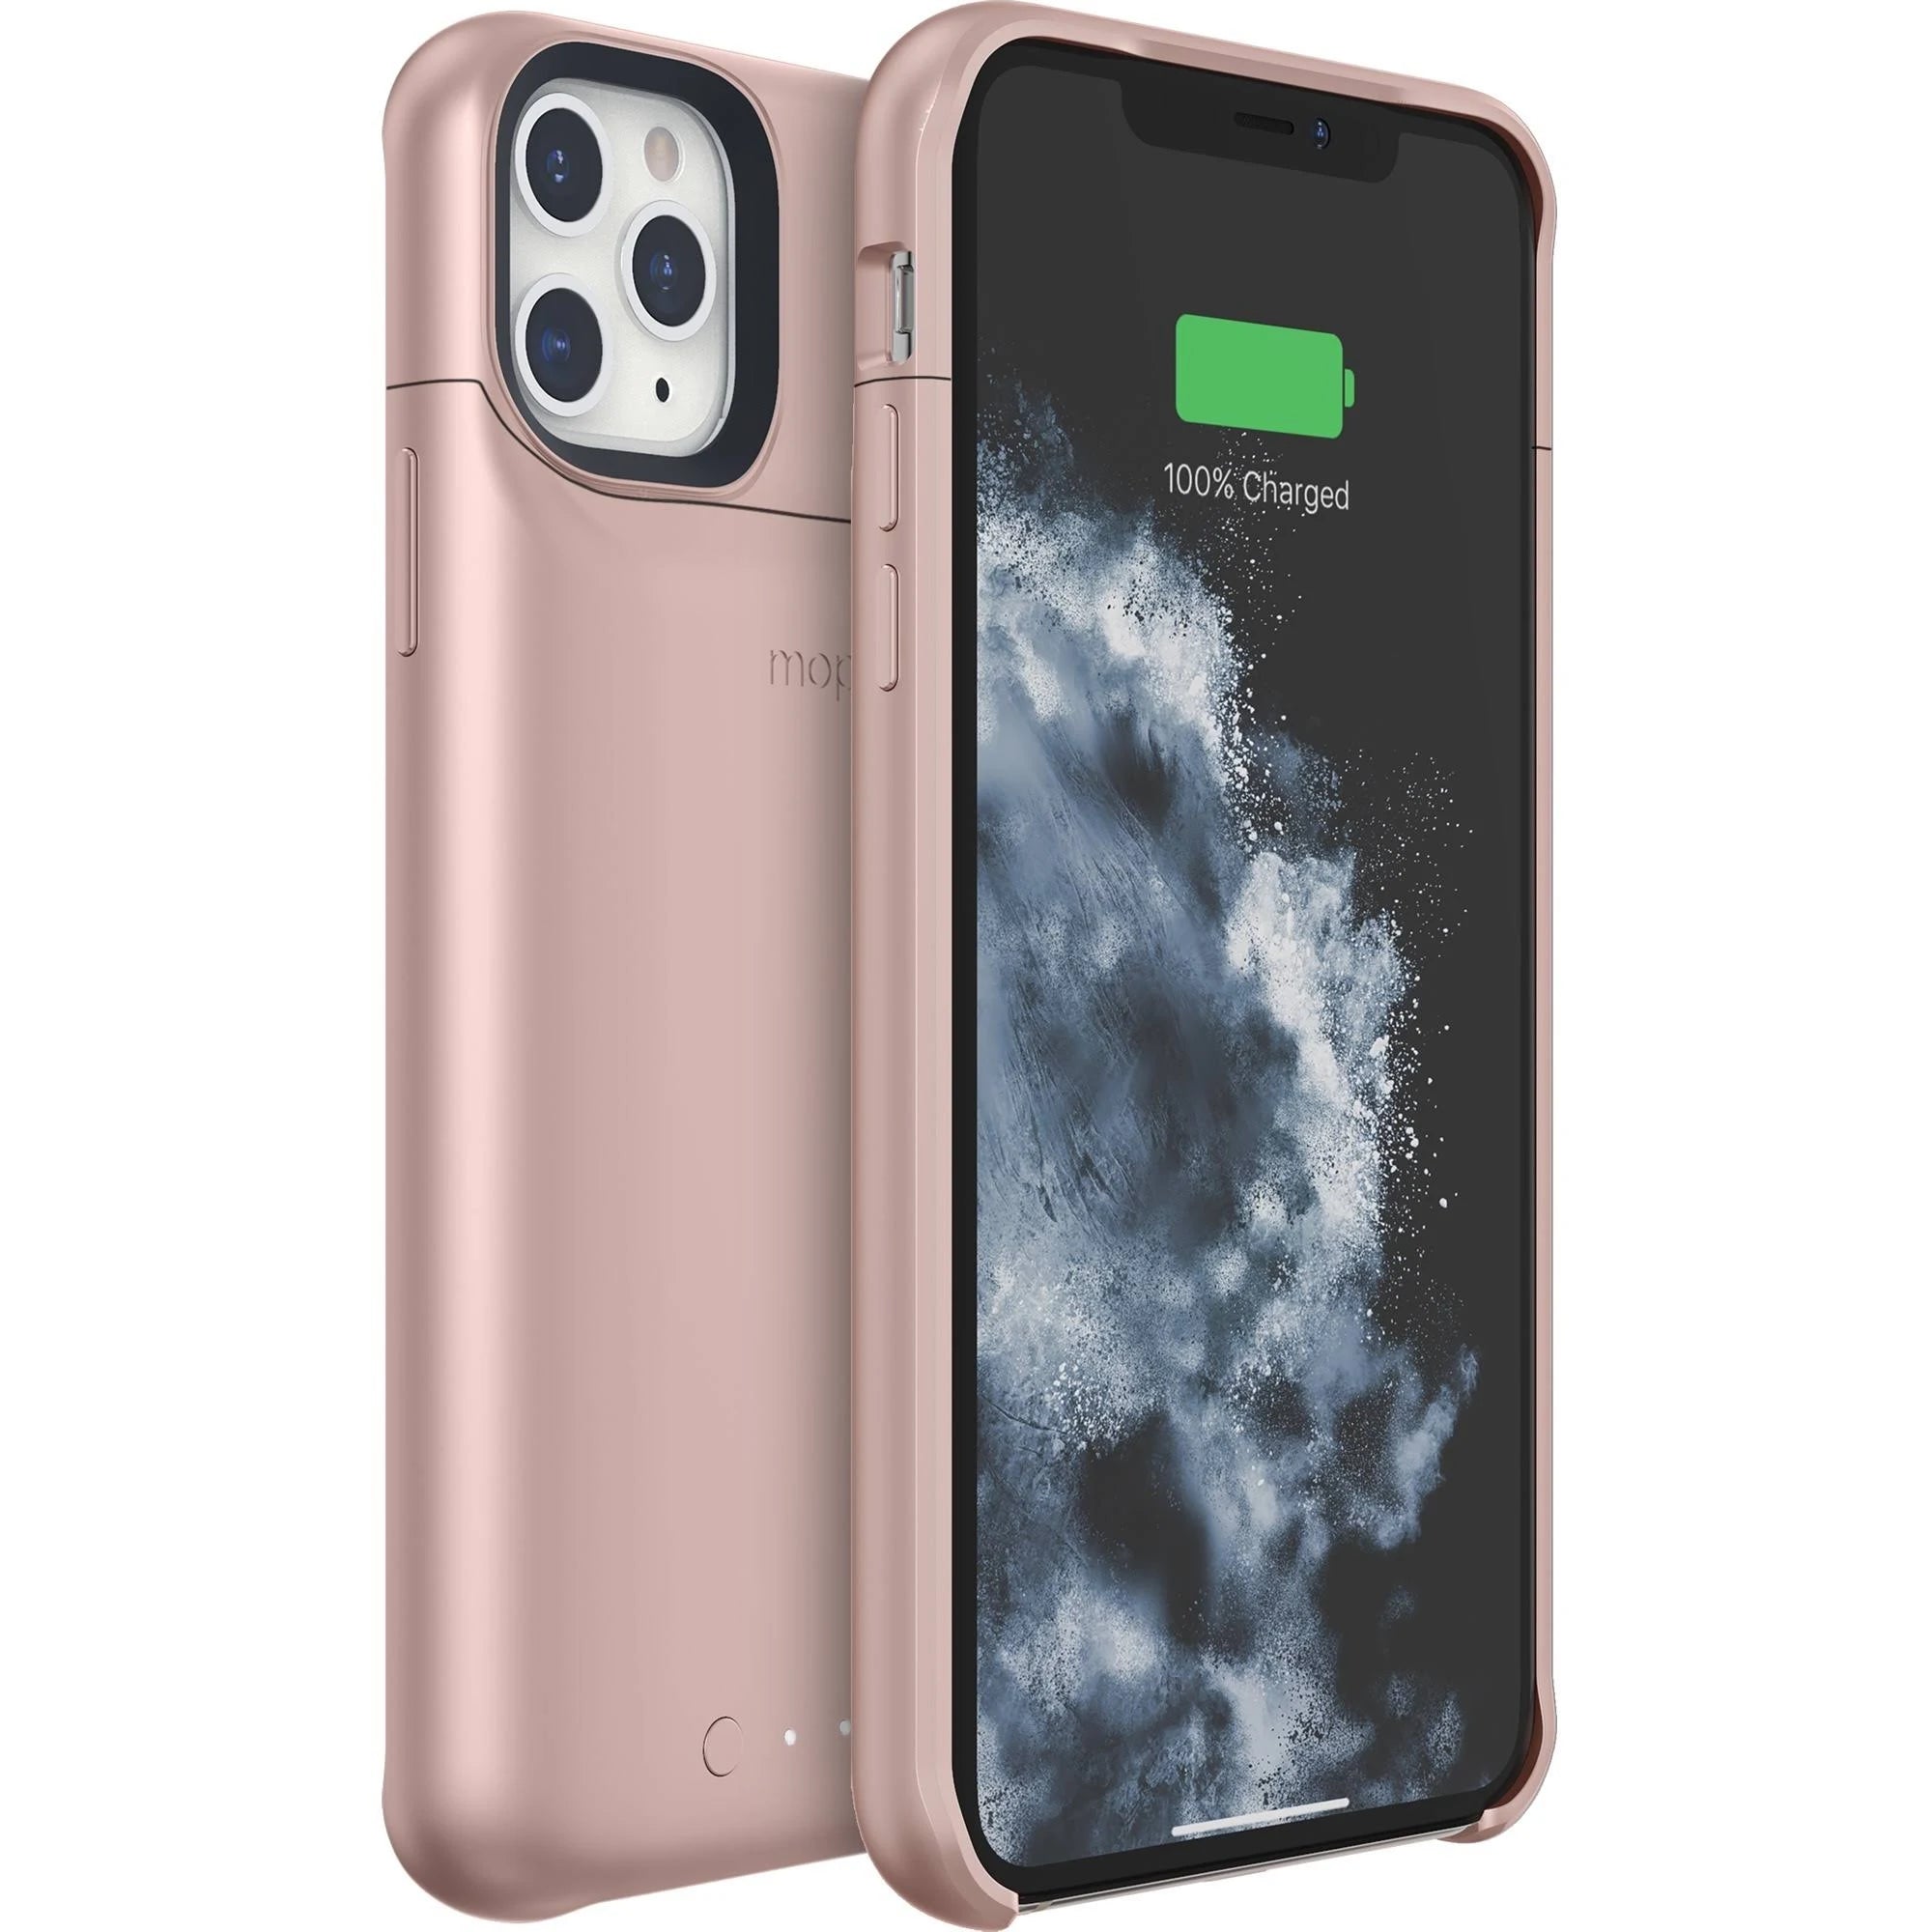 Mophie Juice Pack Access Battery Case iPhone 11 Pro Max